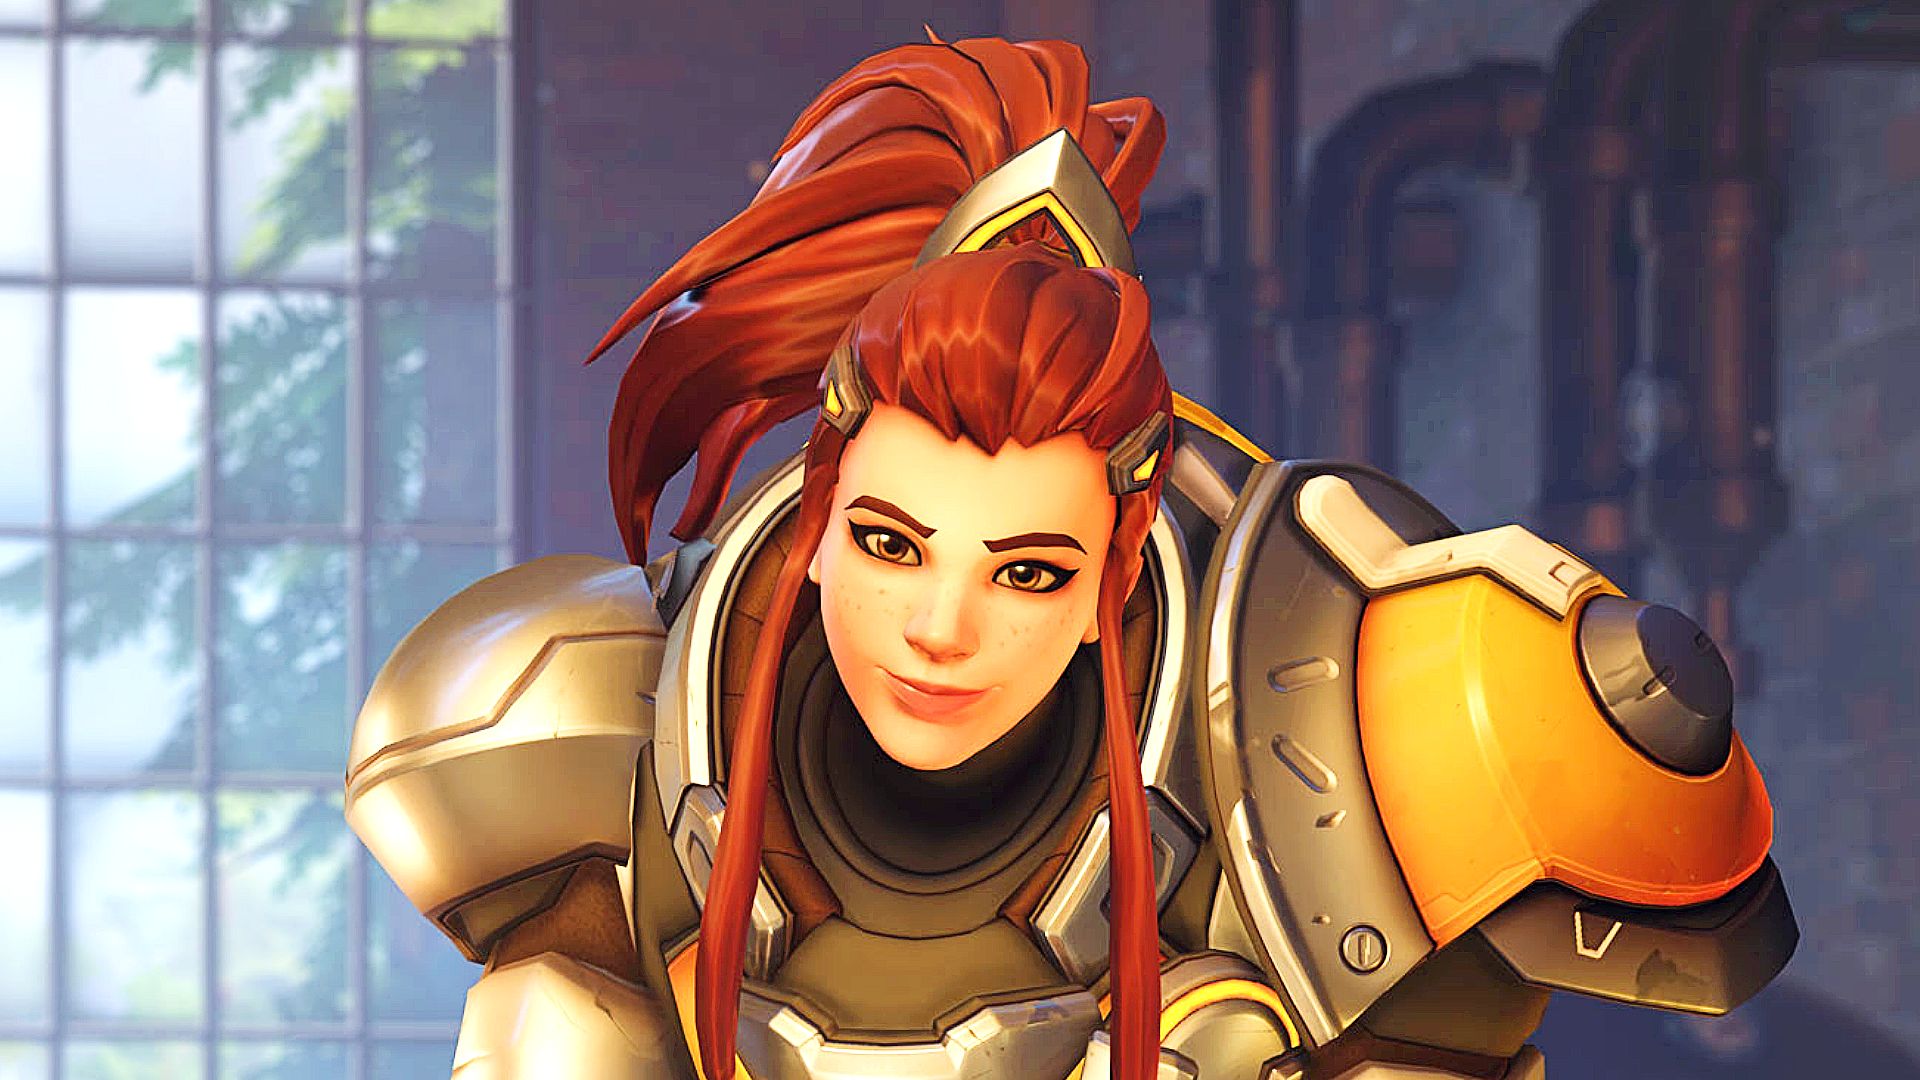 Best FPS Games: An Overwatch 2 character with red hair smiles